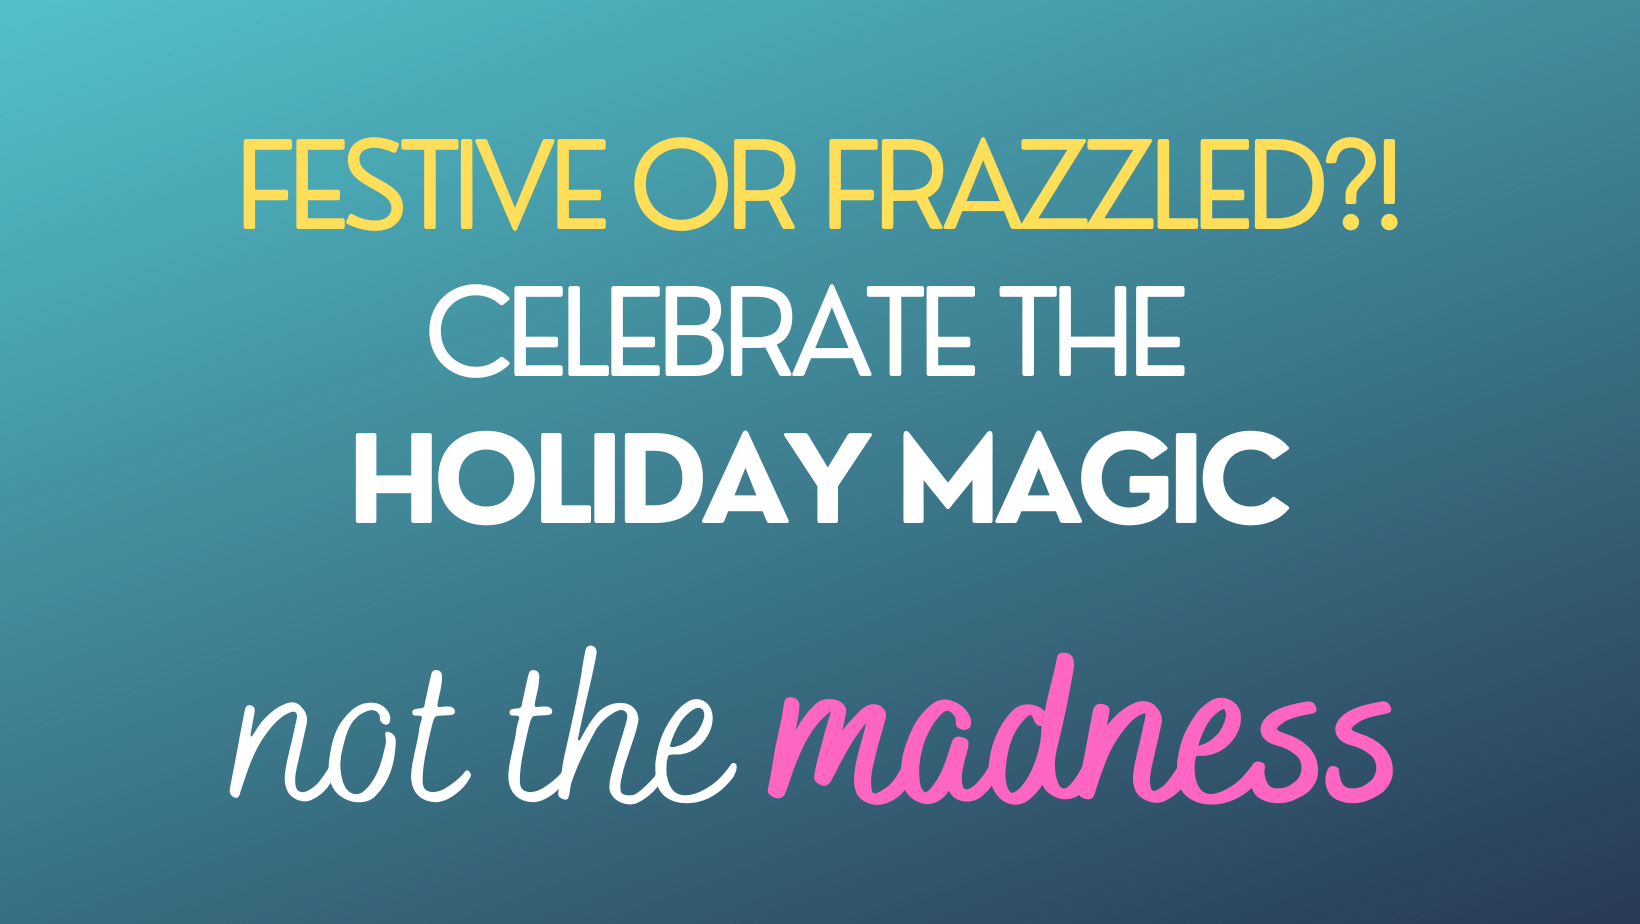 Stressed Out? 10 Ways to Feel Festive, not Frazzled, This Holiday Season